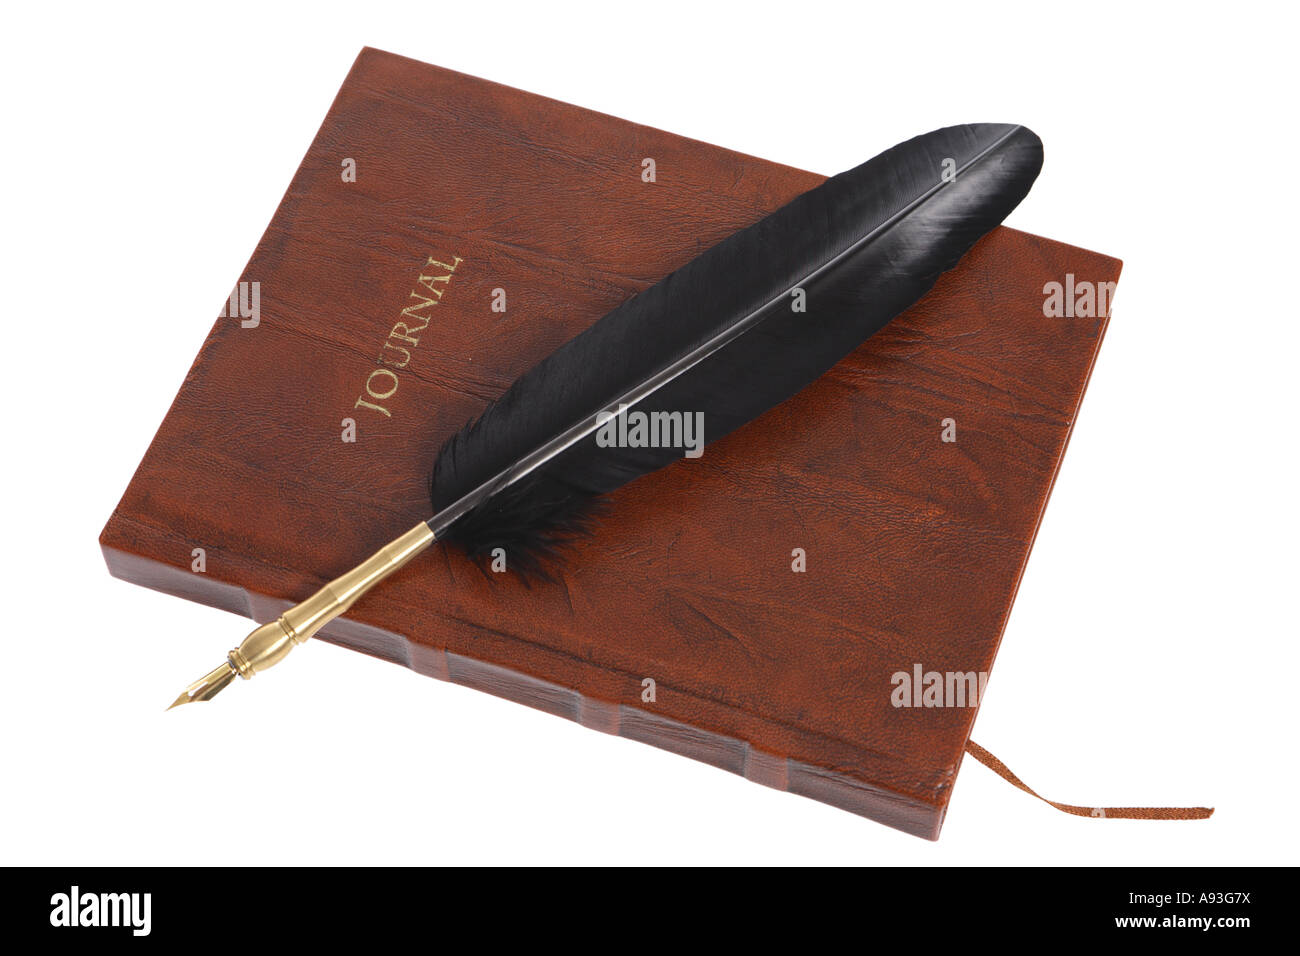 Quill Pen and a Leather Journal cut out on white background Stock Photo